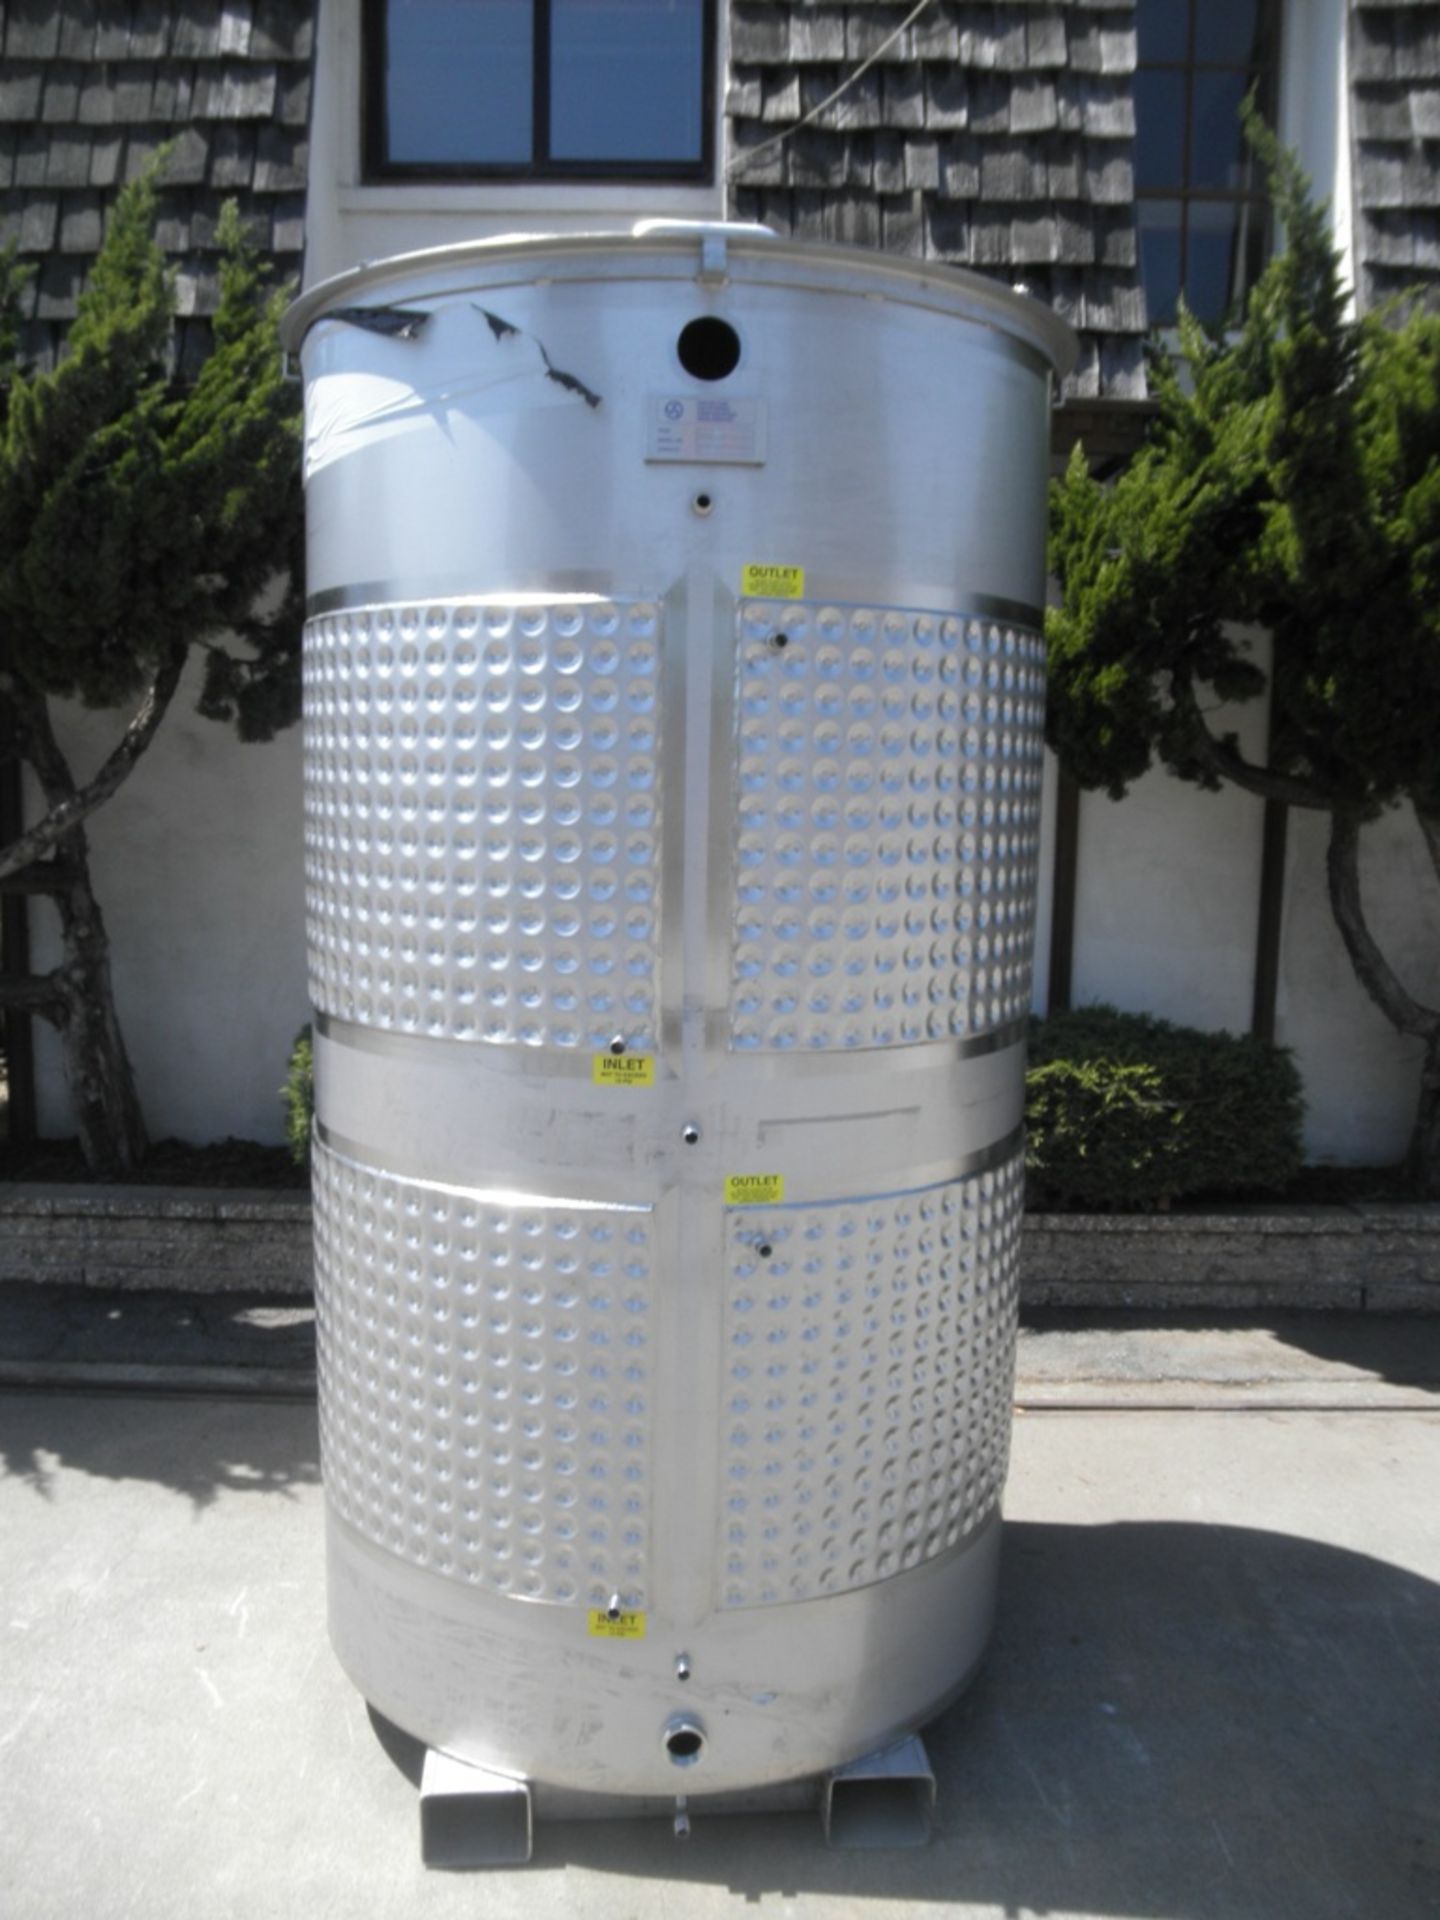 Stainless Tank